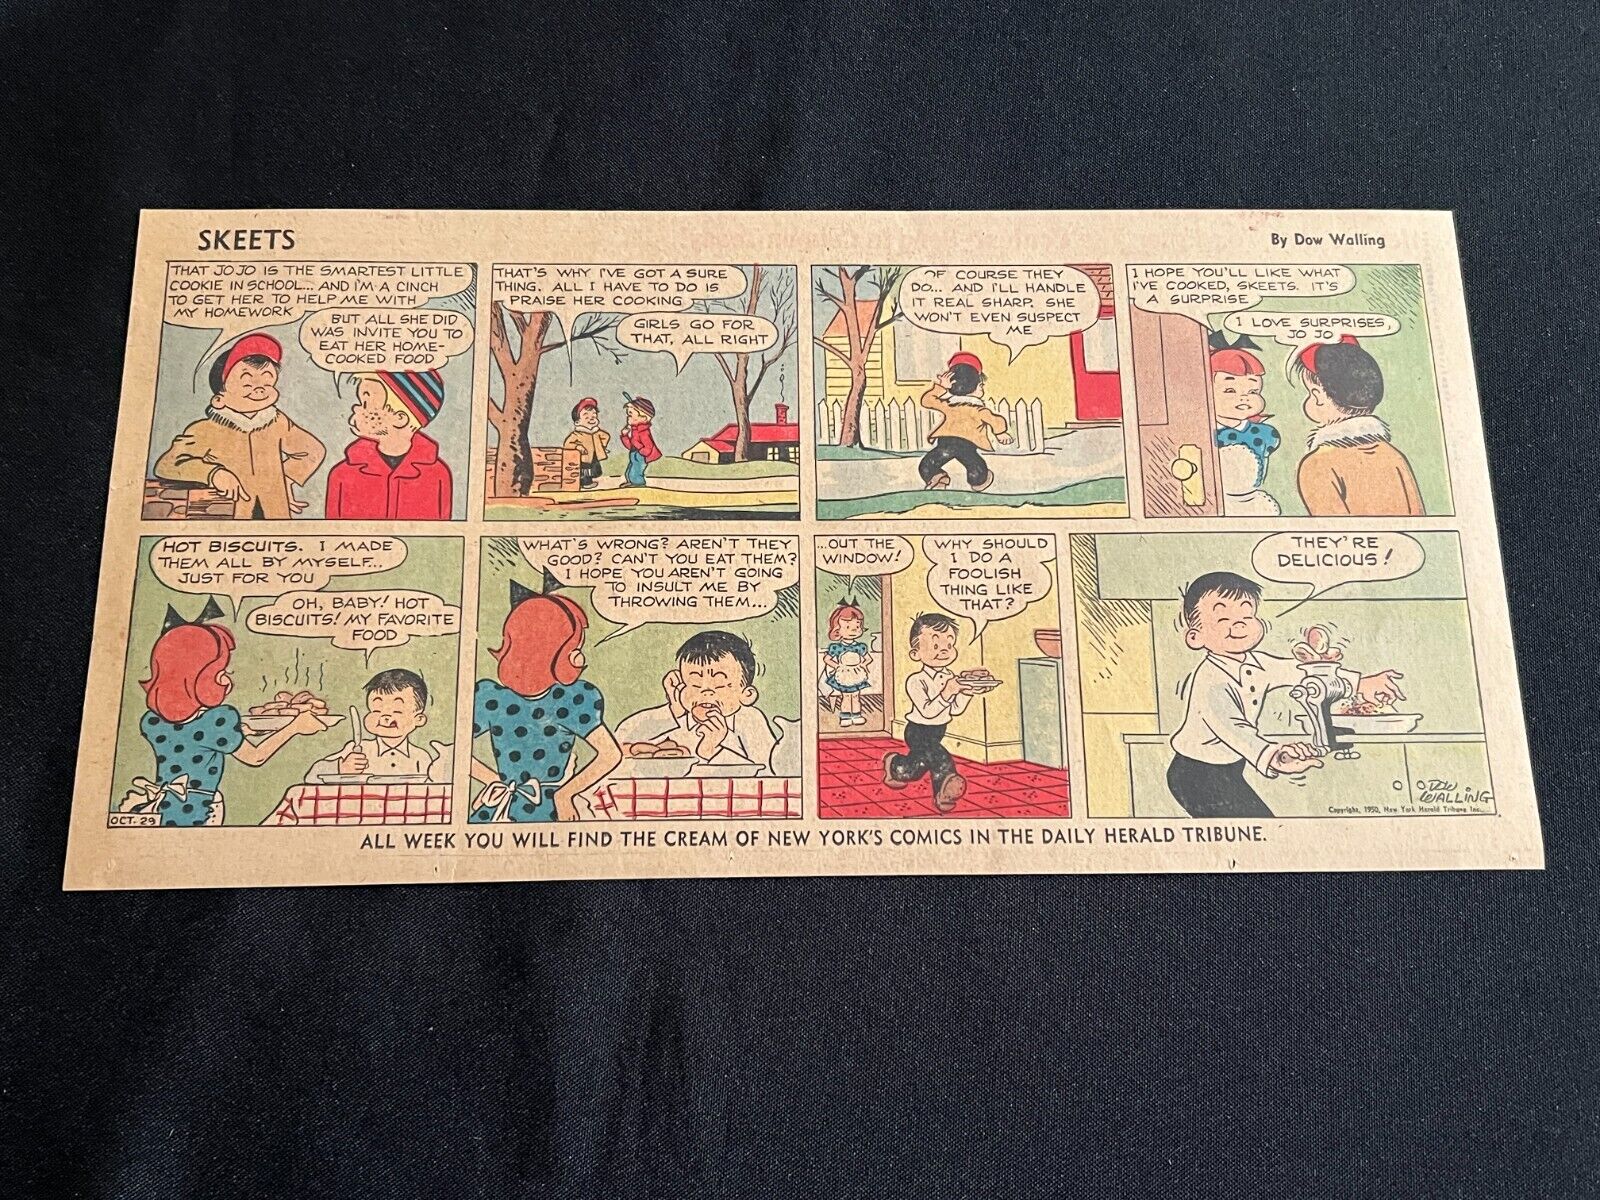 #05 SKEETS by Dow Wallling Sunday Third Page Comic Strip October 29, 1950